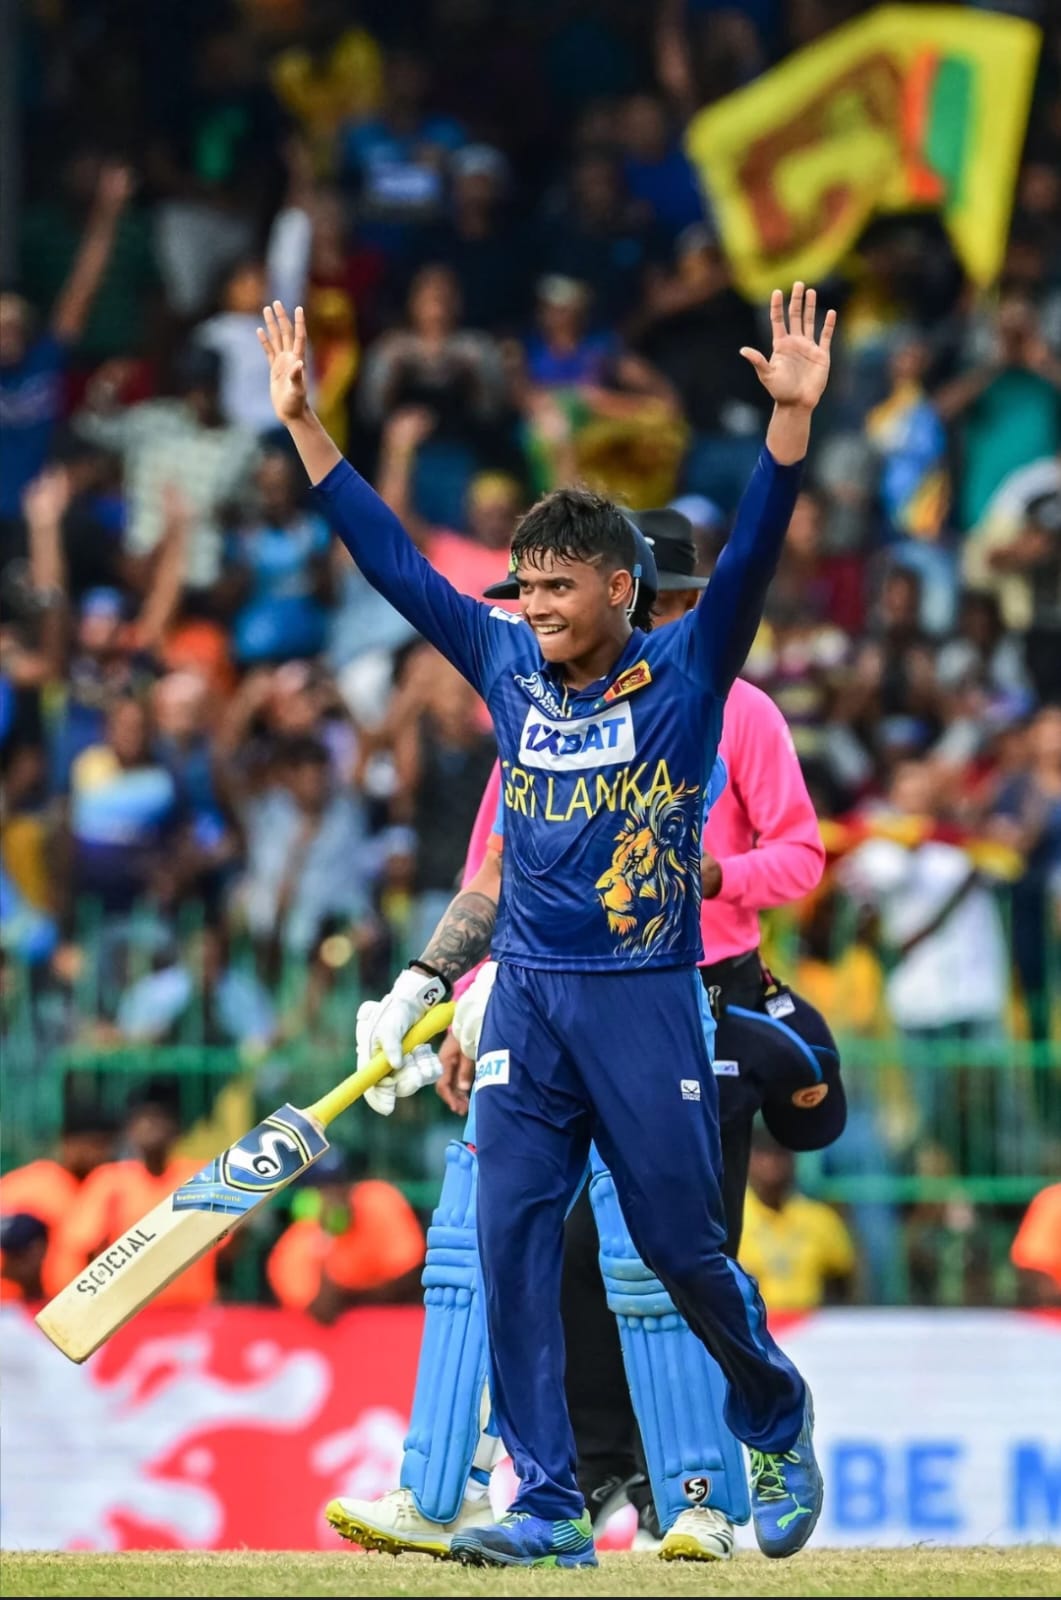 Dunith Wellalage will be the player to watch out for Sri Lanka vs Pakistan. Pic Credits-X